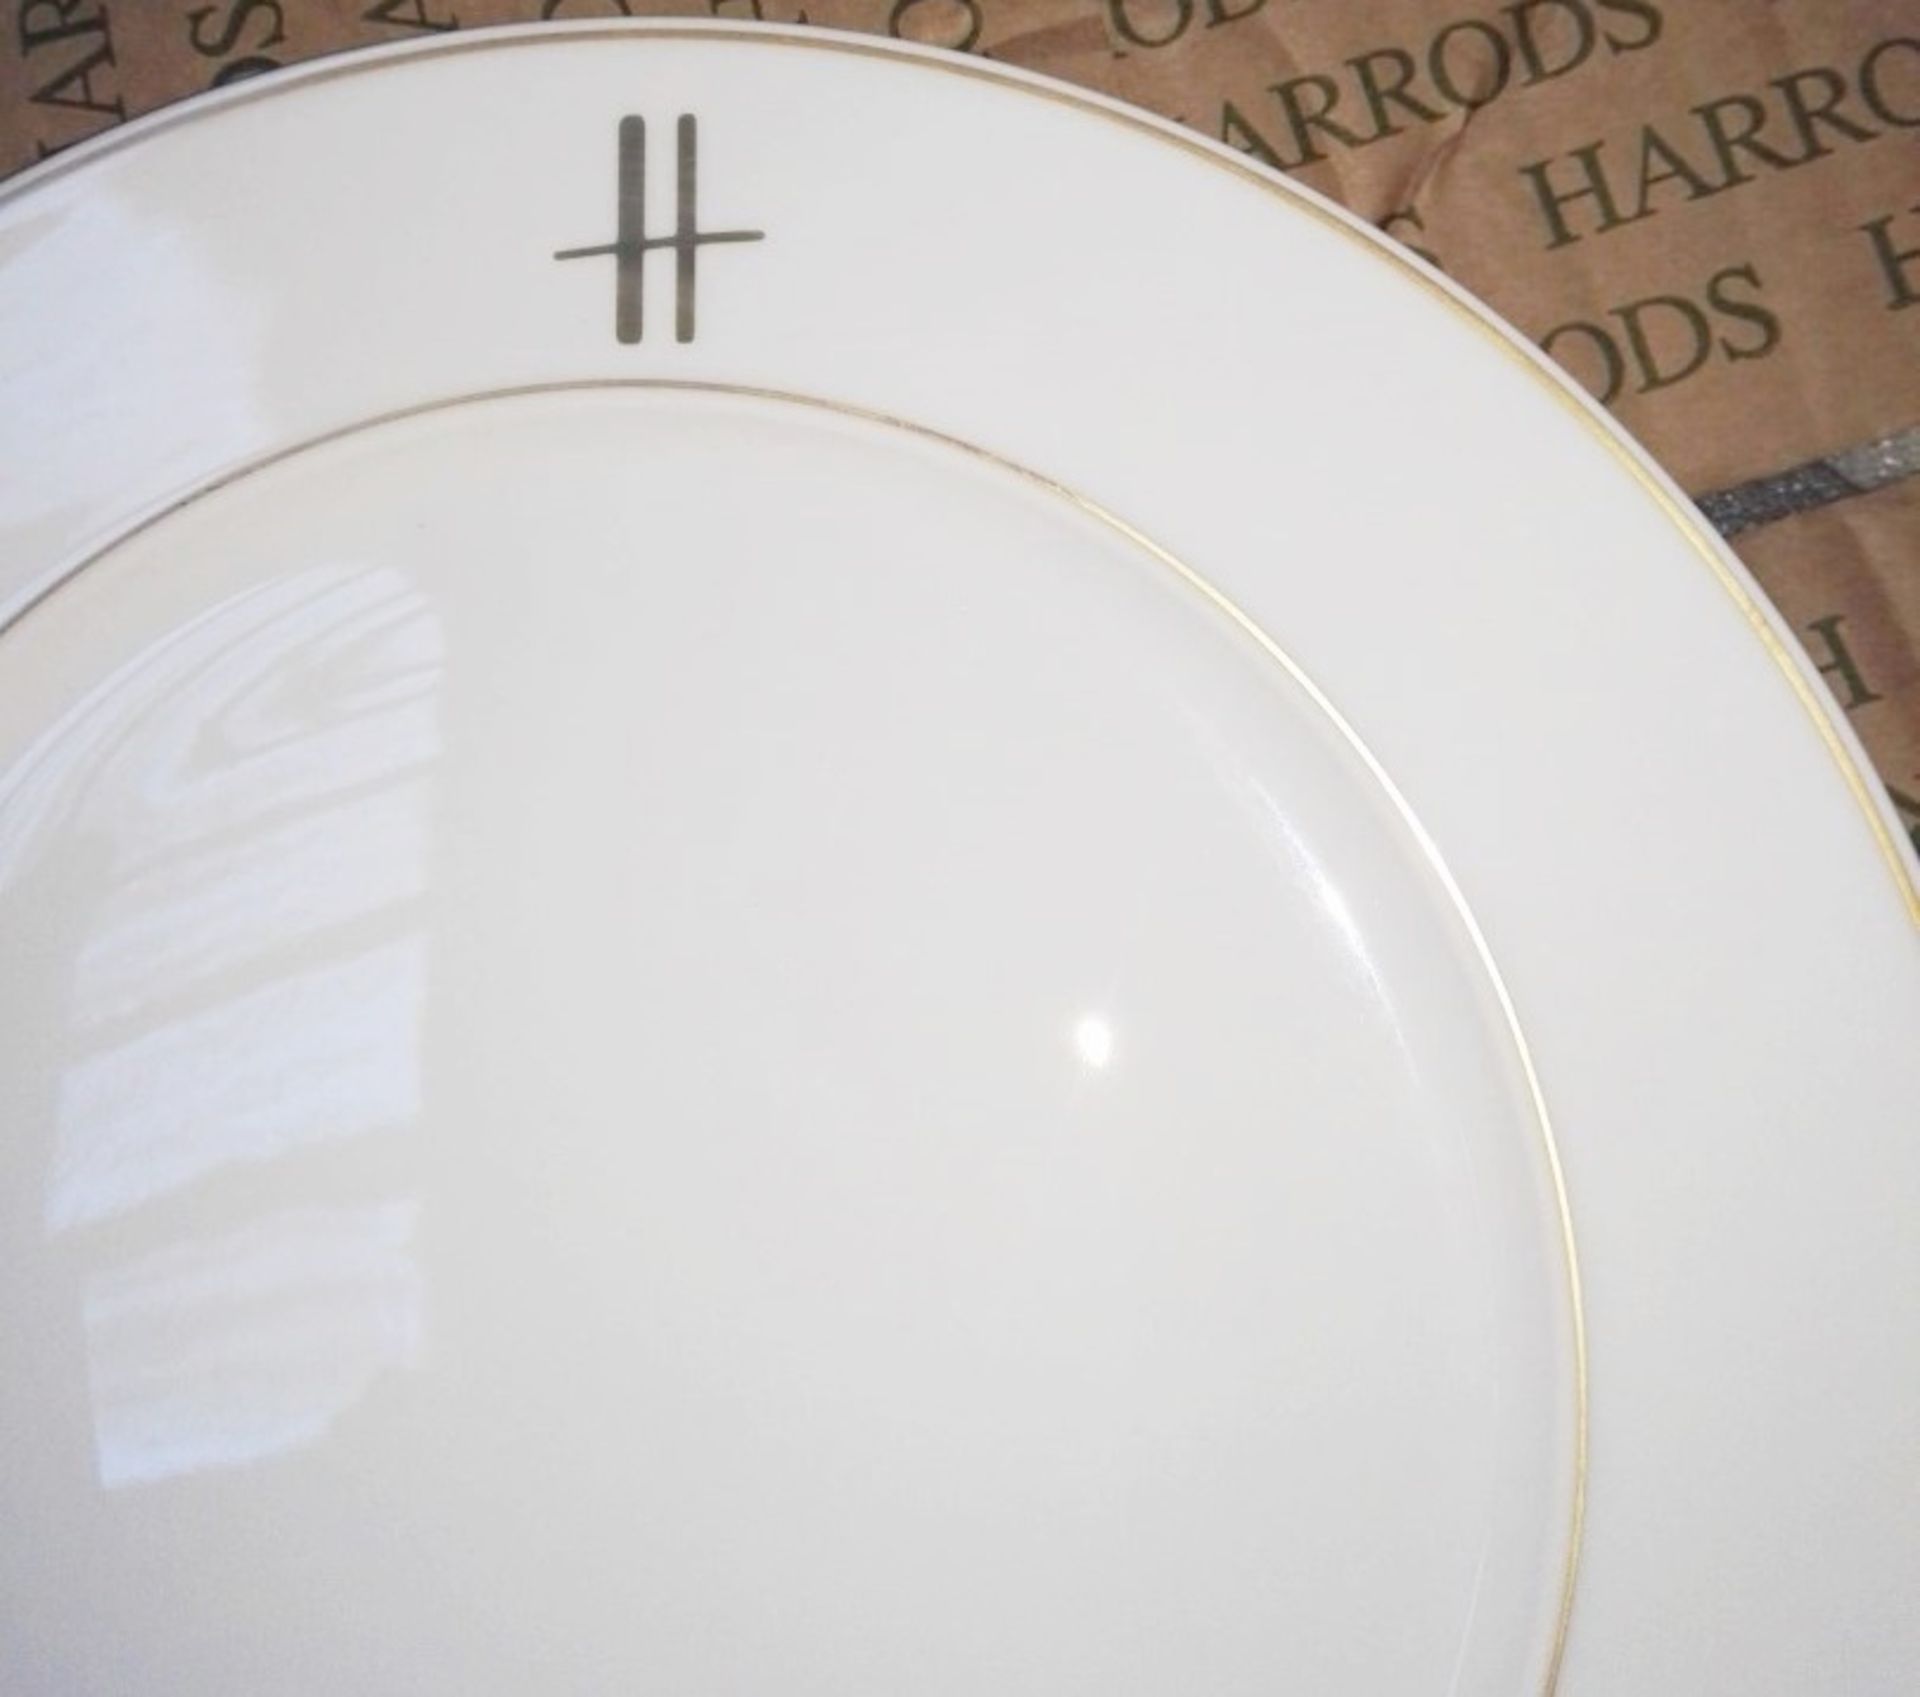 25 x PILLIVUYT Porcelain Dinner Plates In White Featuring 'Famous Branding' In Gold - Dimensions: - Image 4 of 5